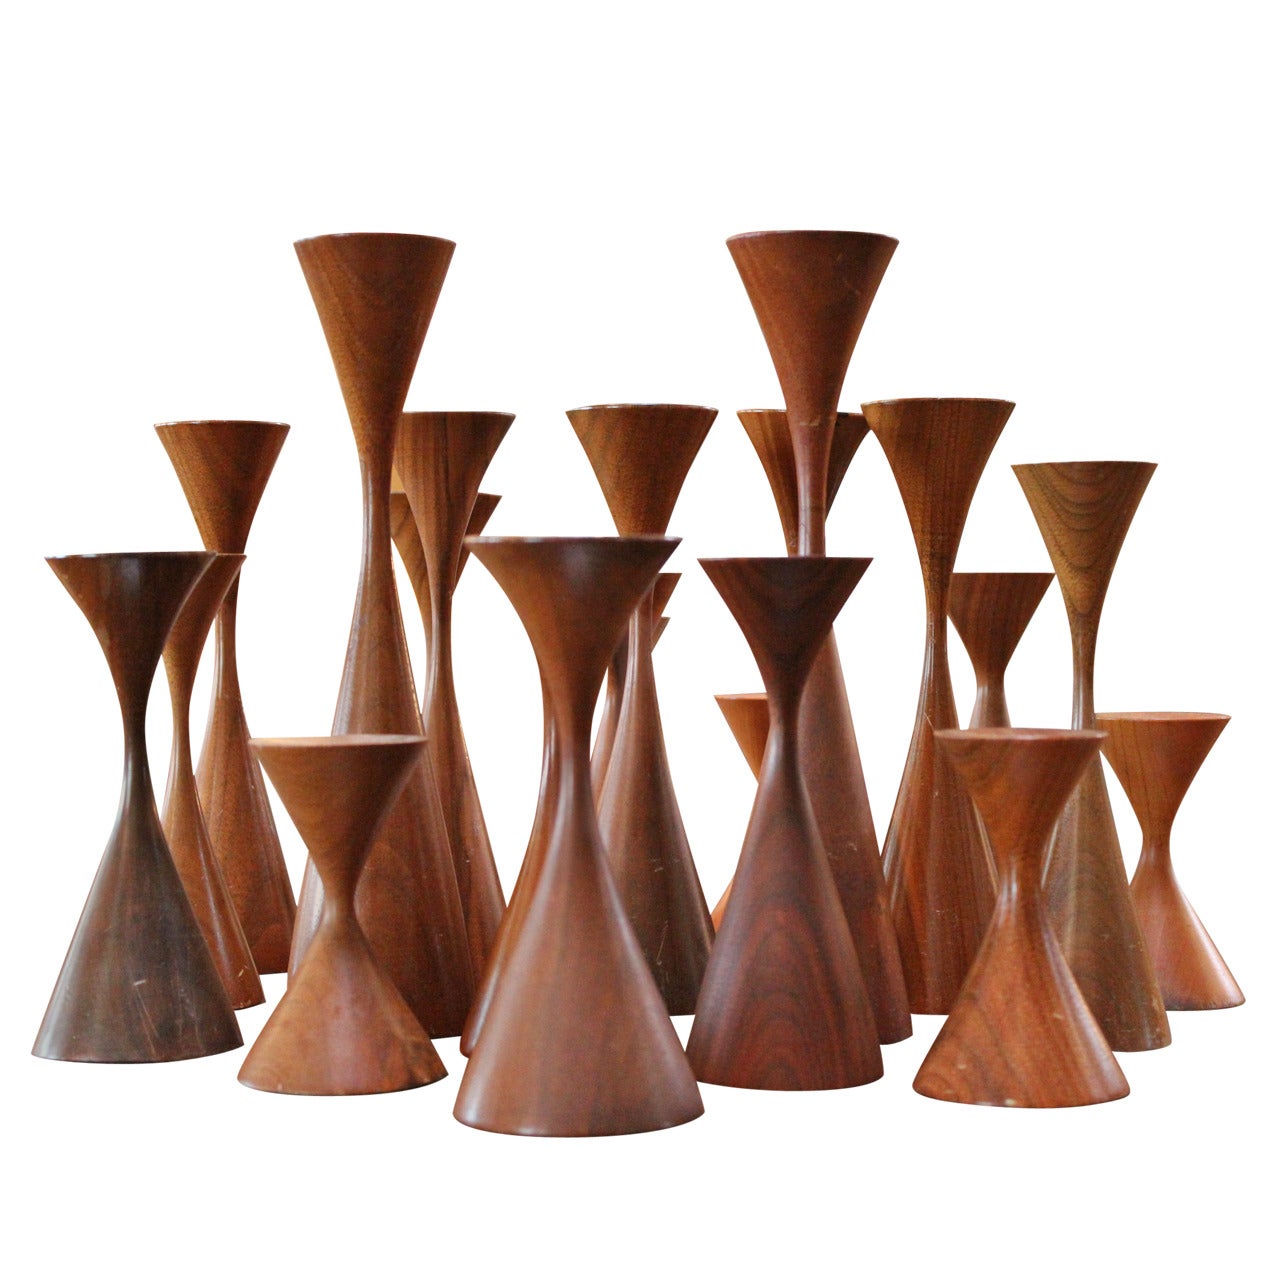 Collection of Candlesticks by Rude Osolnik